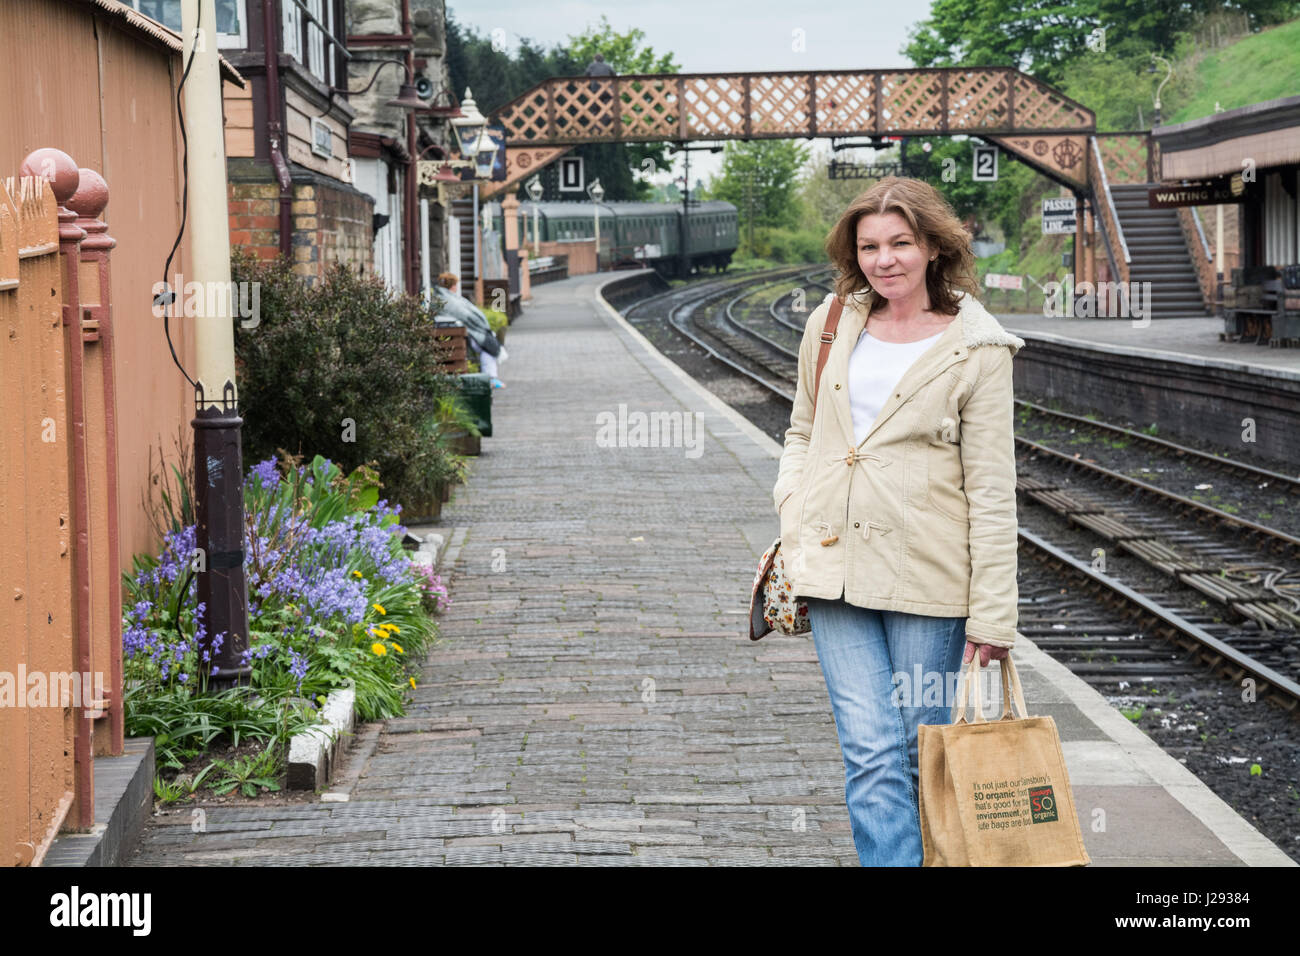 Woman standing on a vintage railway platform carrying a hessian Stock Photo